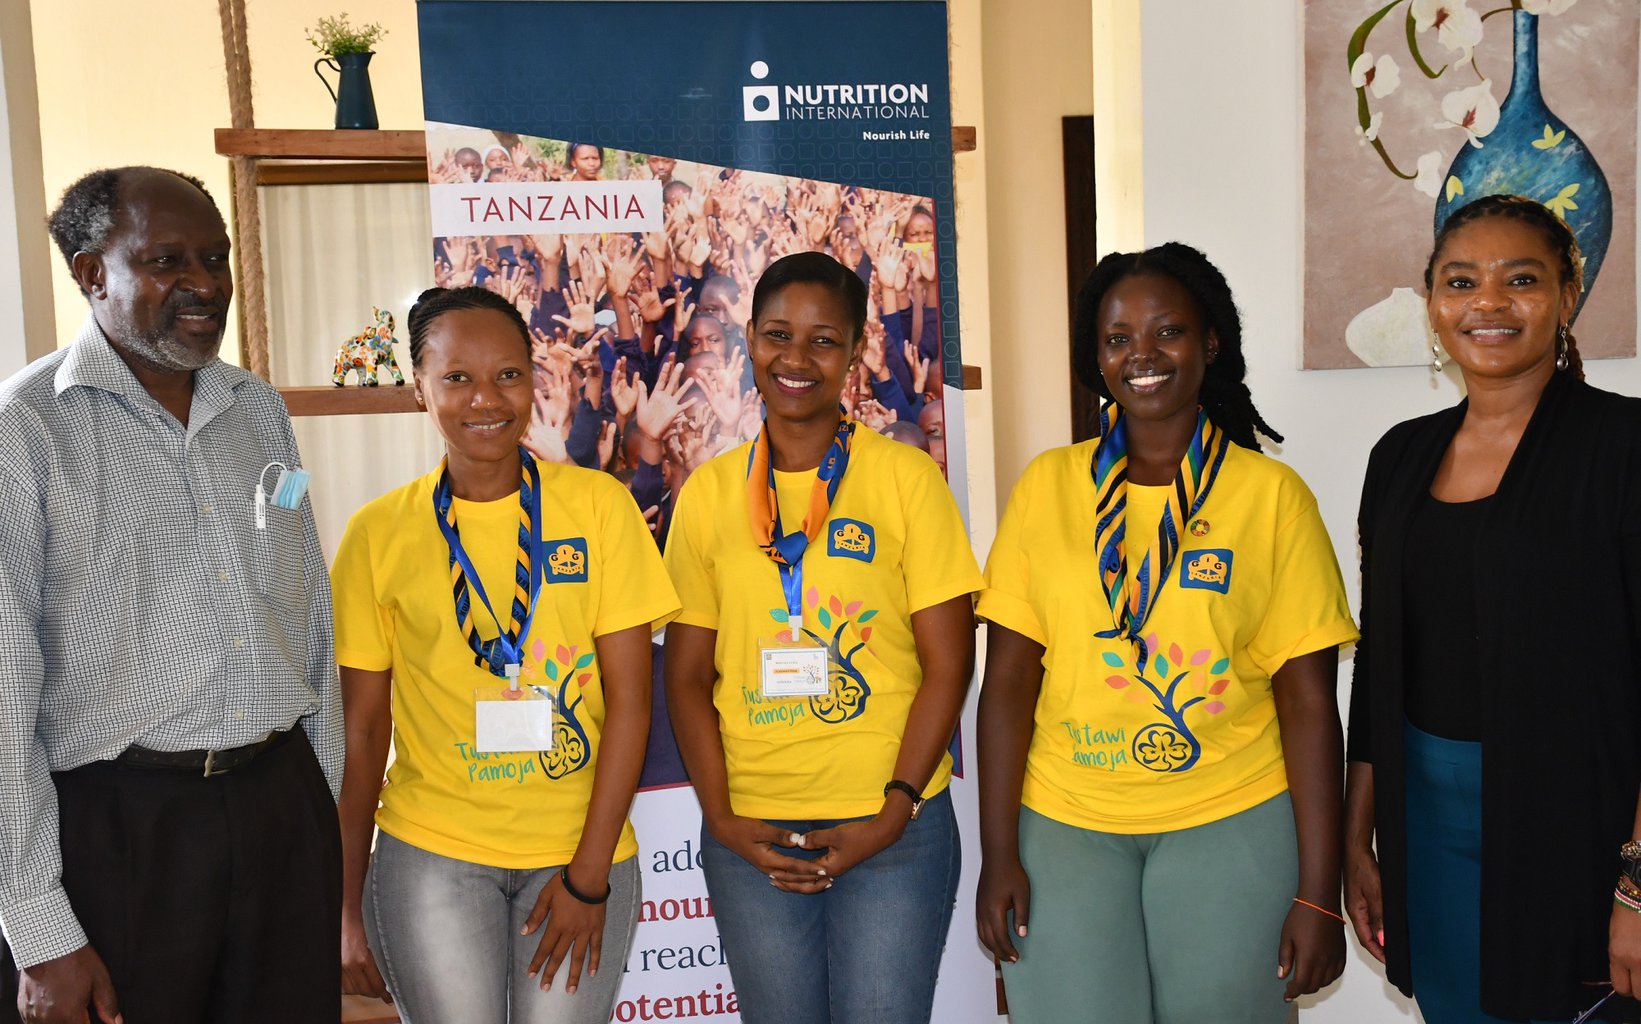 Group photo at the Africa Regional Conference for Girl Guides and Girl Scouts